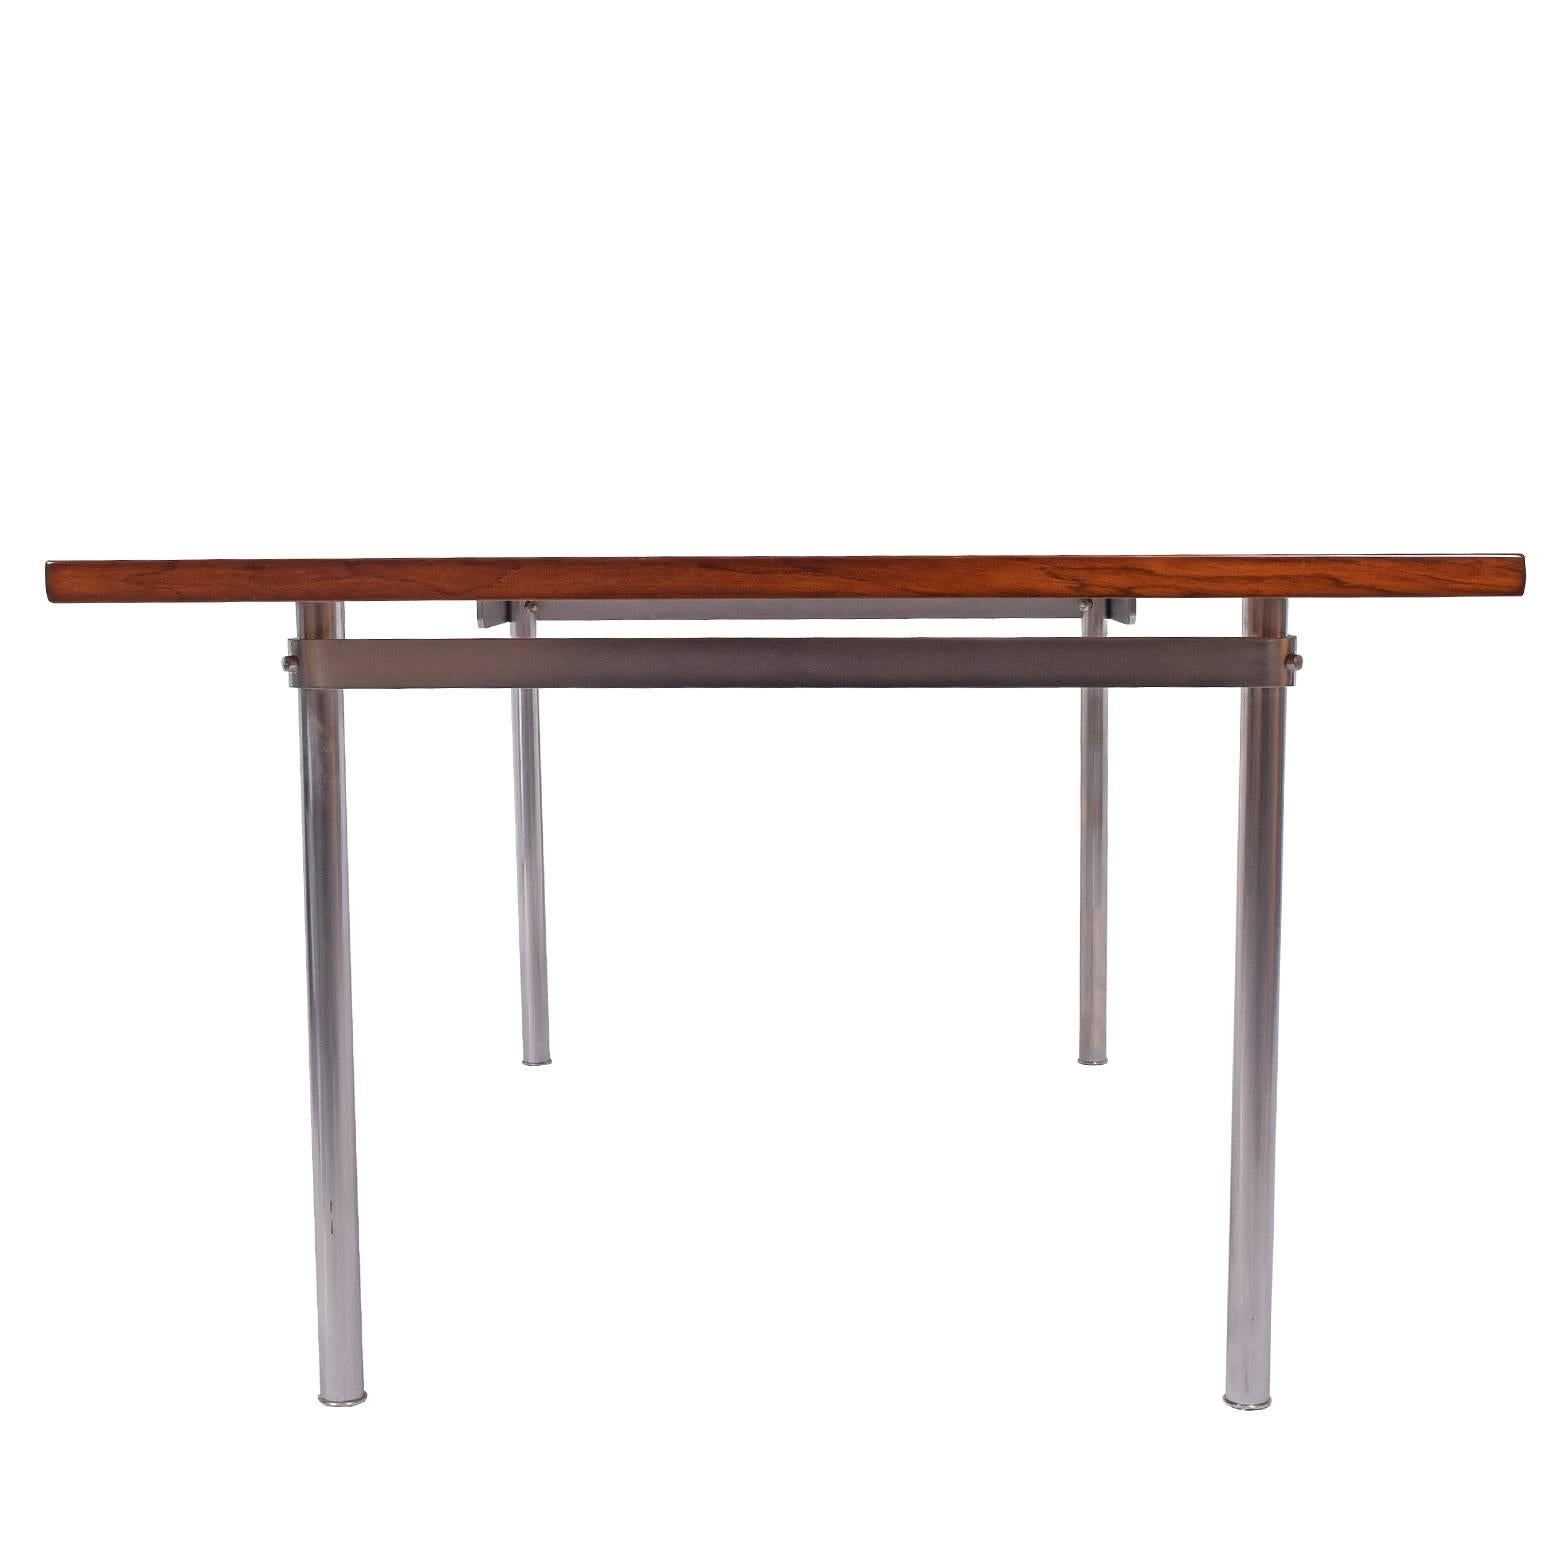 Scandinavian Modern Working Dining Rosewood Table by Hans Wegner #AT-318 for Andreas Tuck For Sale